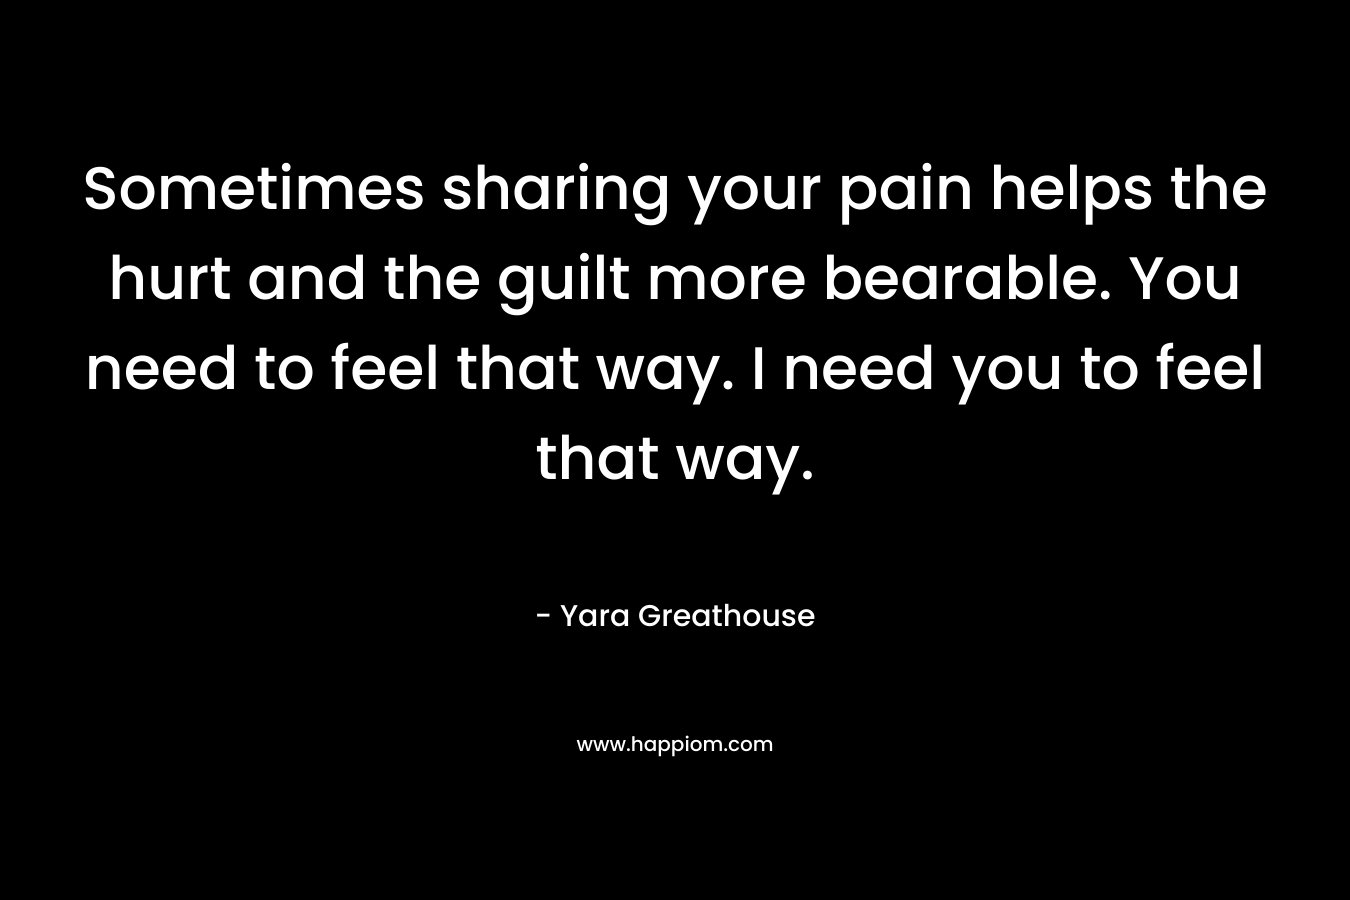 Sometimes sharing your pain helps the hurt and the guilt more bearable. You need to feel that way. I need you to feel that way.